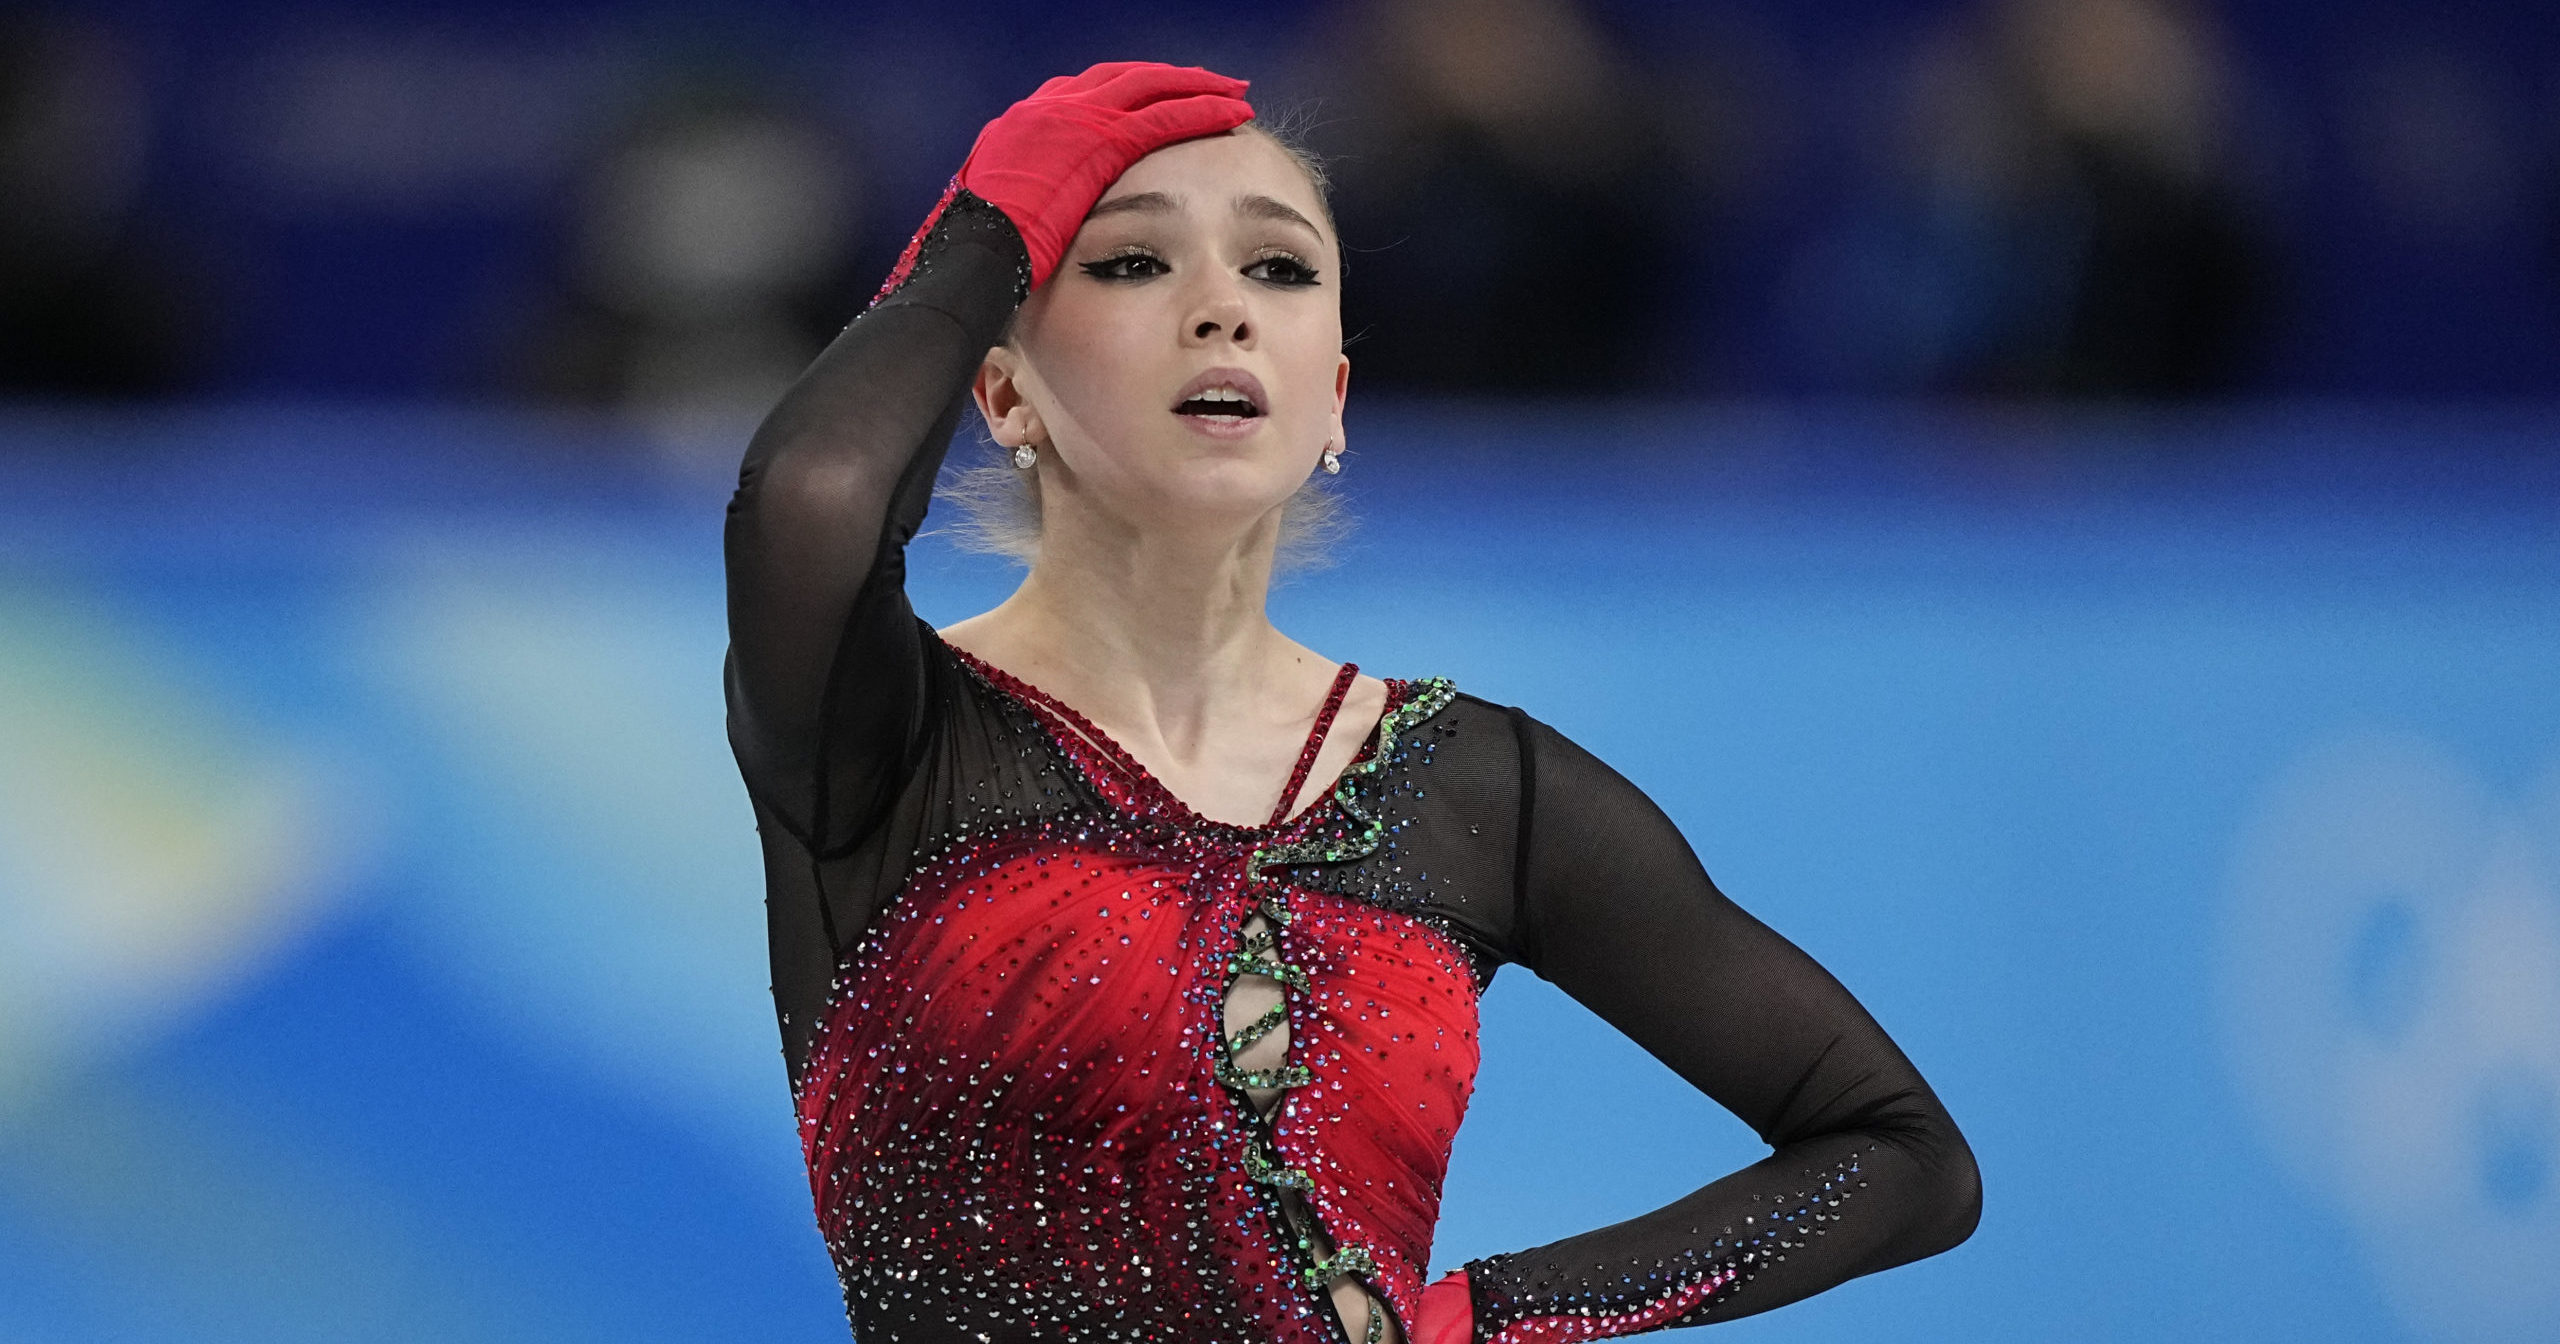 Kamila Valieva of the Russian Olympic Committee reacts during the women's team free skate program at the 2022 Winter Olympics on Feb. 7, 2022, in Beijing.